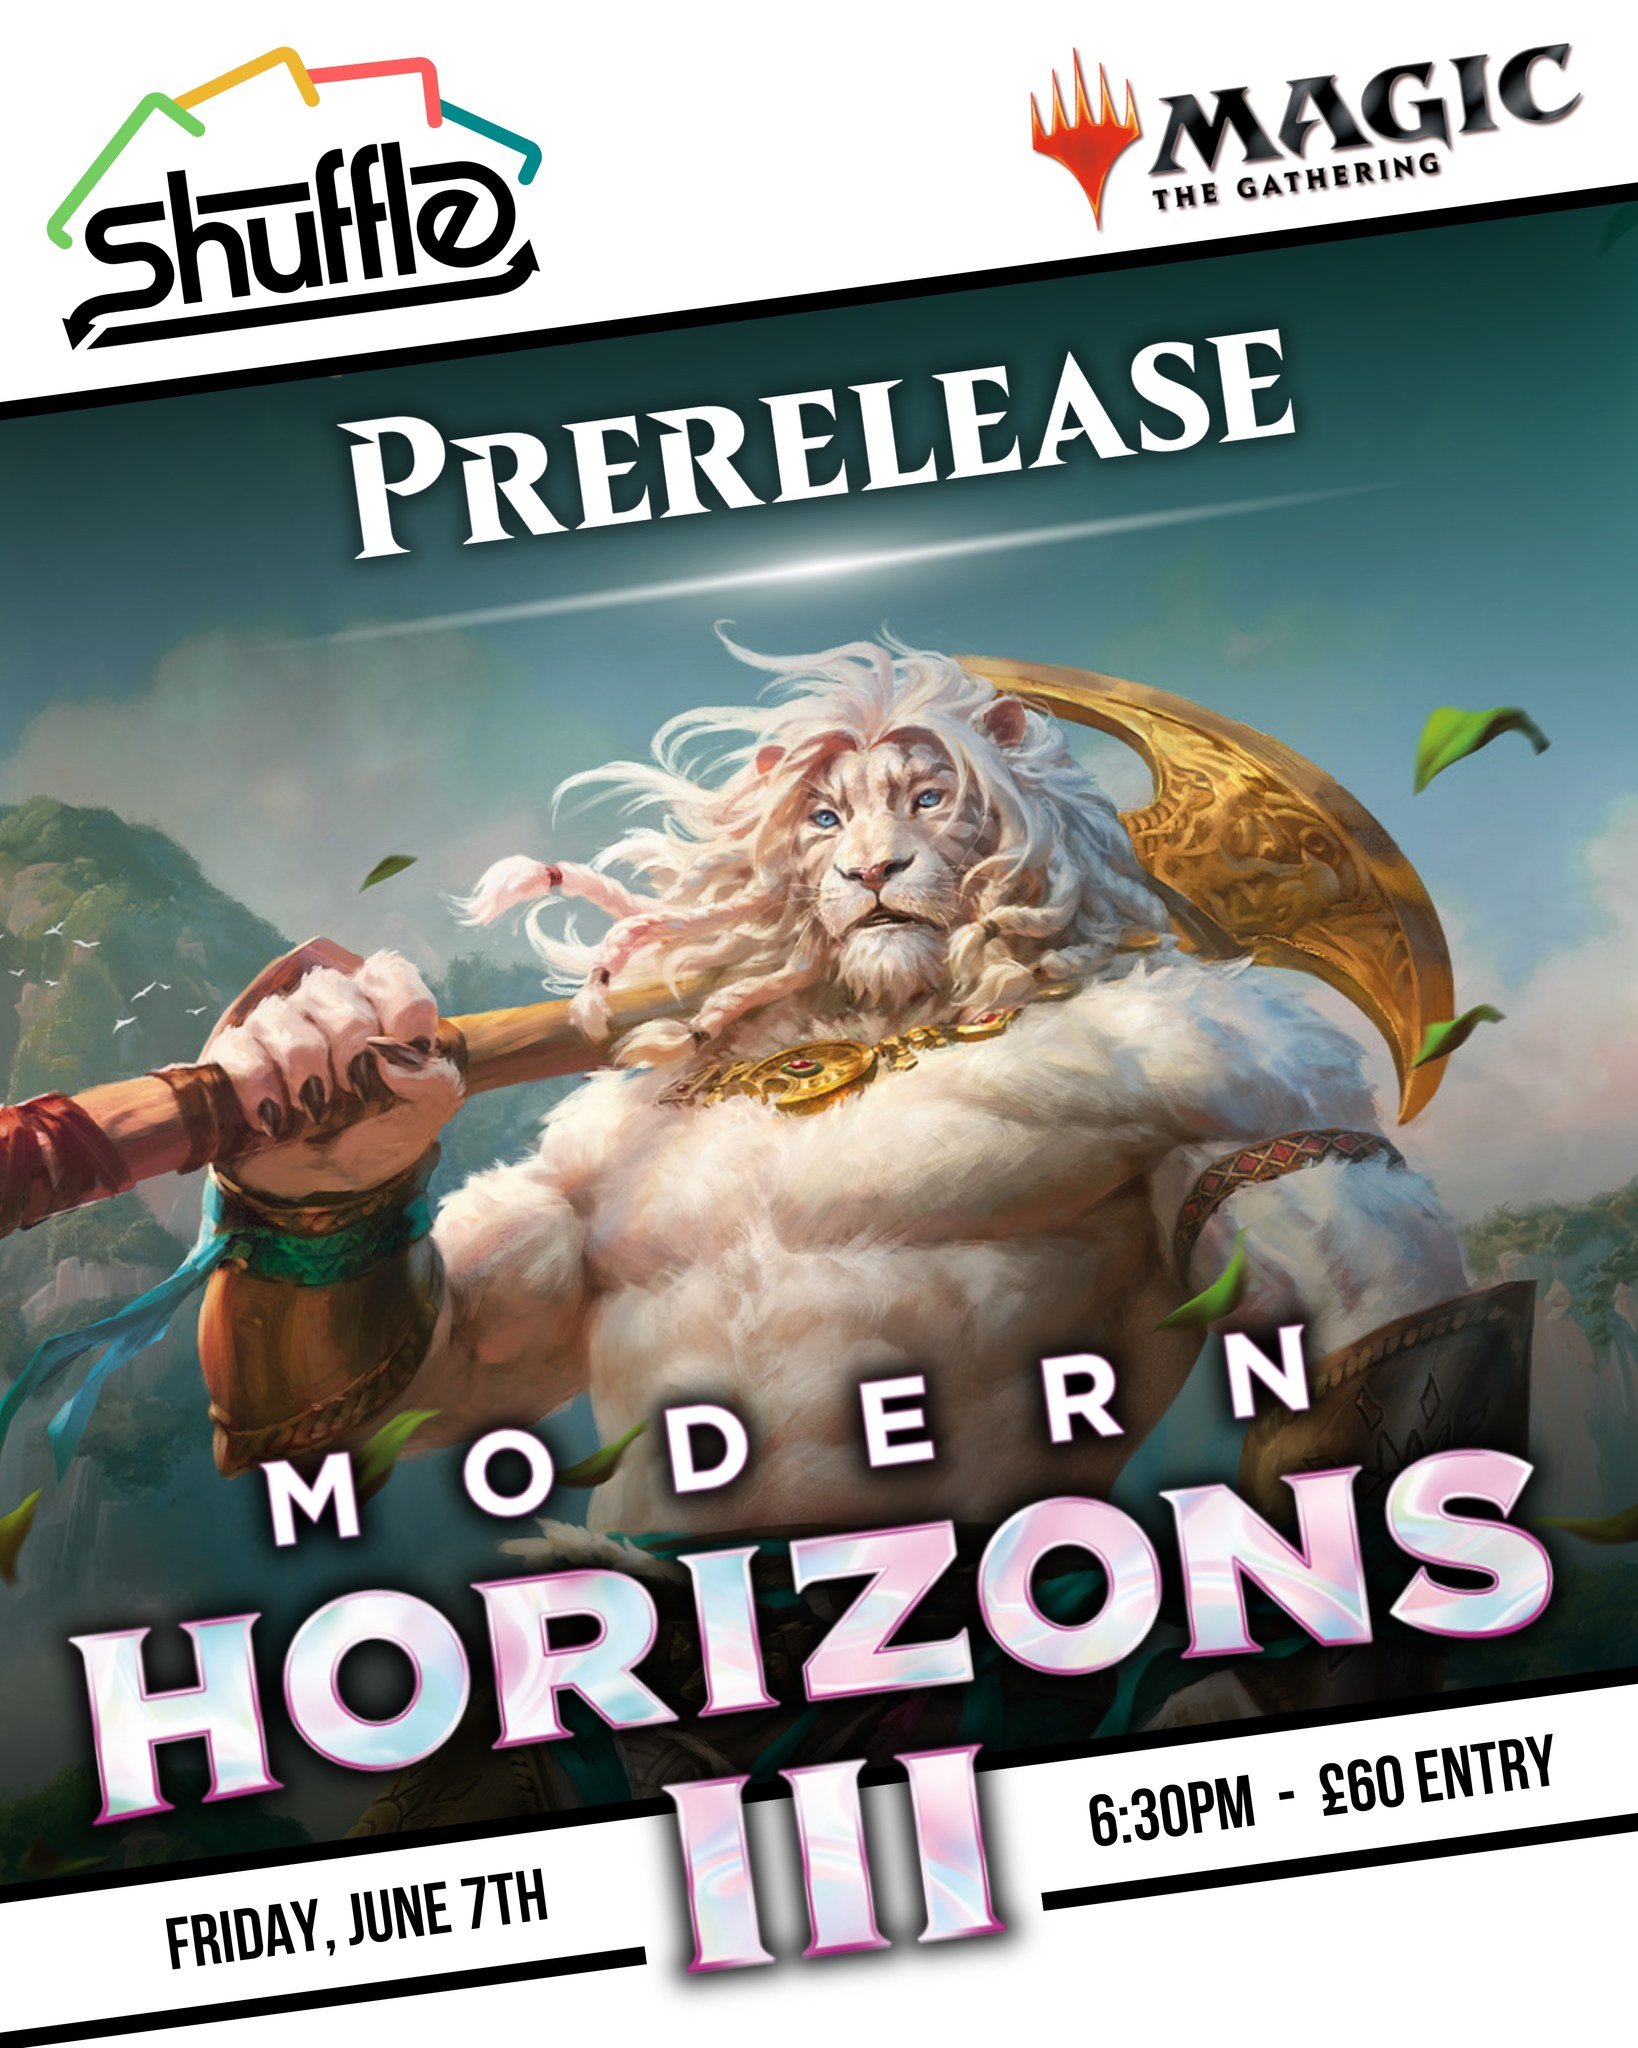 🦁 MODERN HORZONS III PRERELEASE 🦁

🗓️ Date: Friday, June 7th
🕡Time: 6:30pm (until approx. 10:30pm)
🪙 Entry Fee*: &pound;60 per person

Your Prerelease Kit contains:

- 6 Modern Horizons 3 Play Boosters
- 1 foil, year-stamped Rare or Mythic Rare
